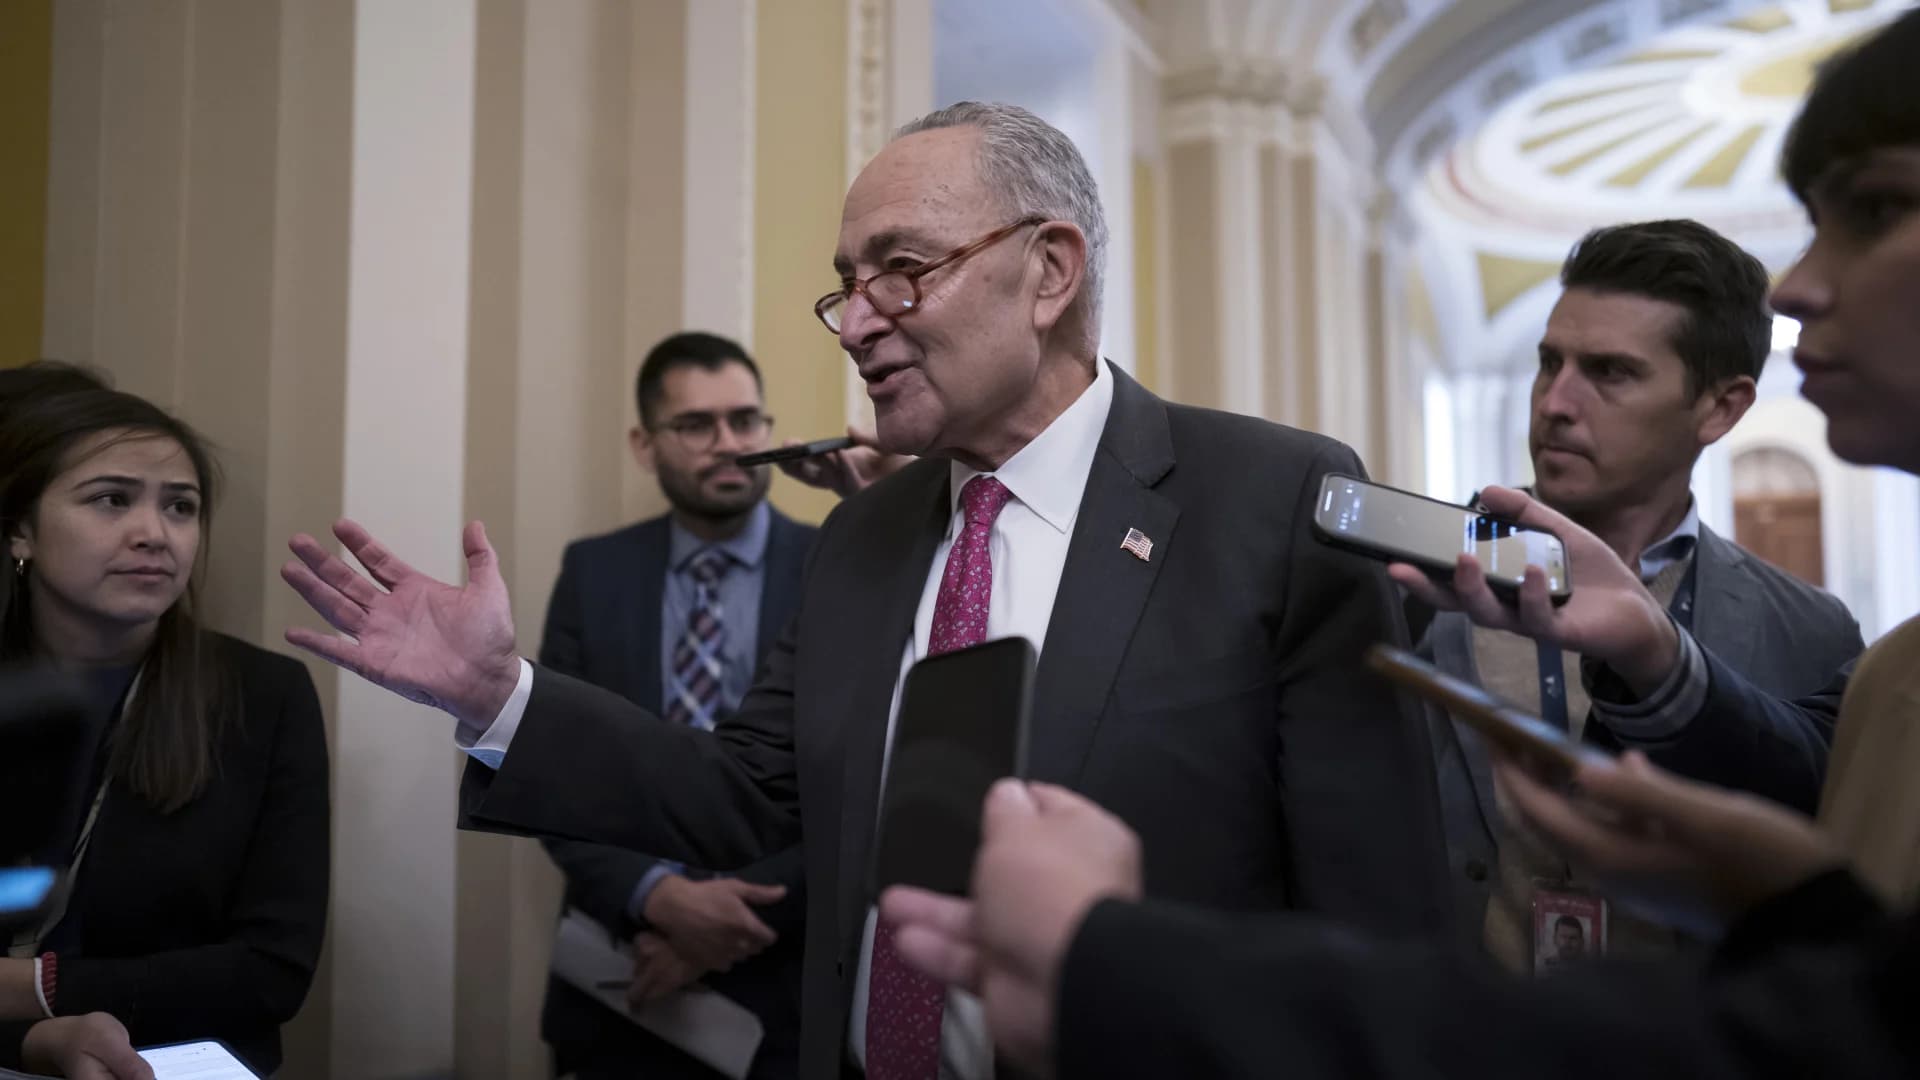 Schumer reelected Senate leader after Dems expand majority